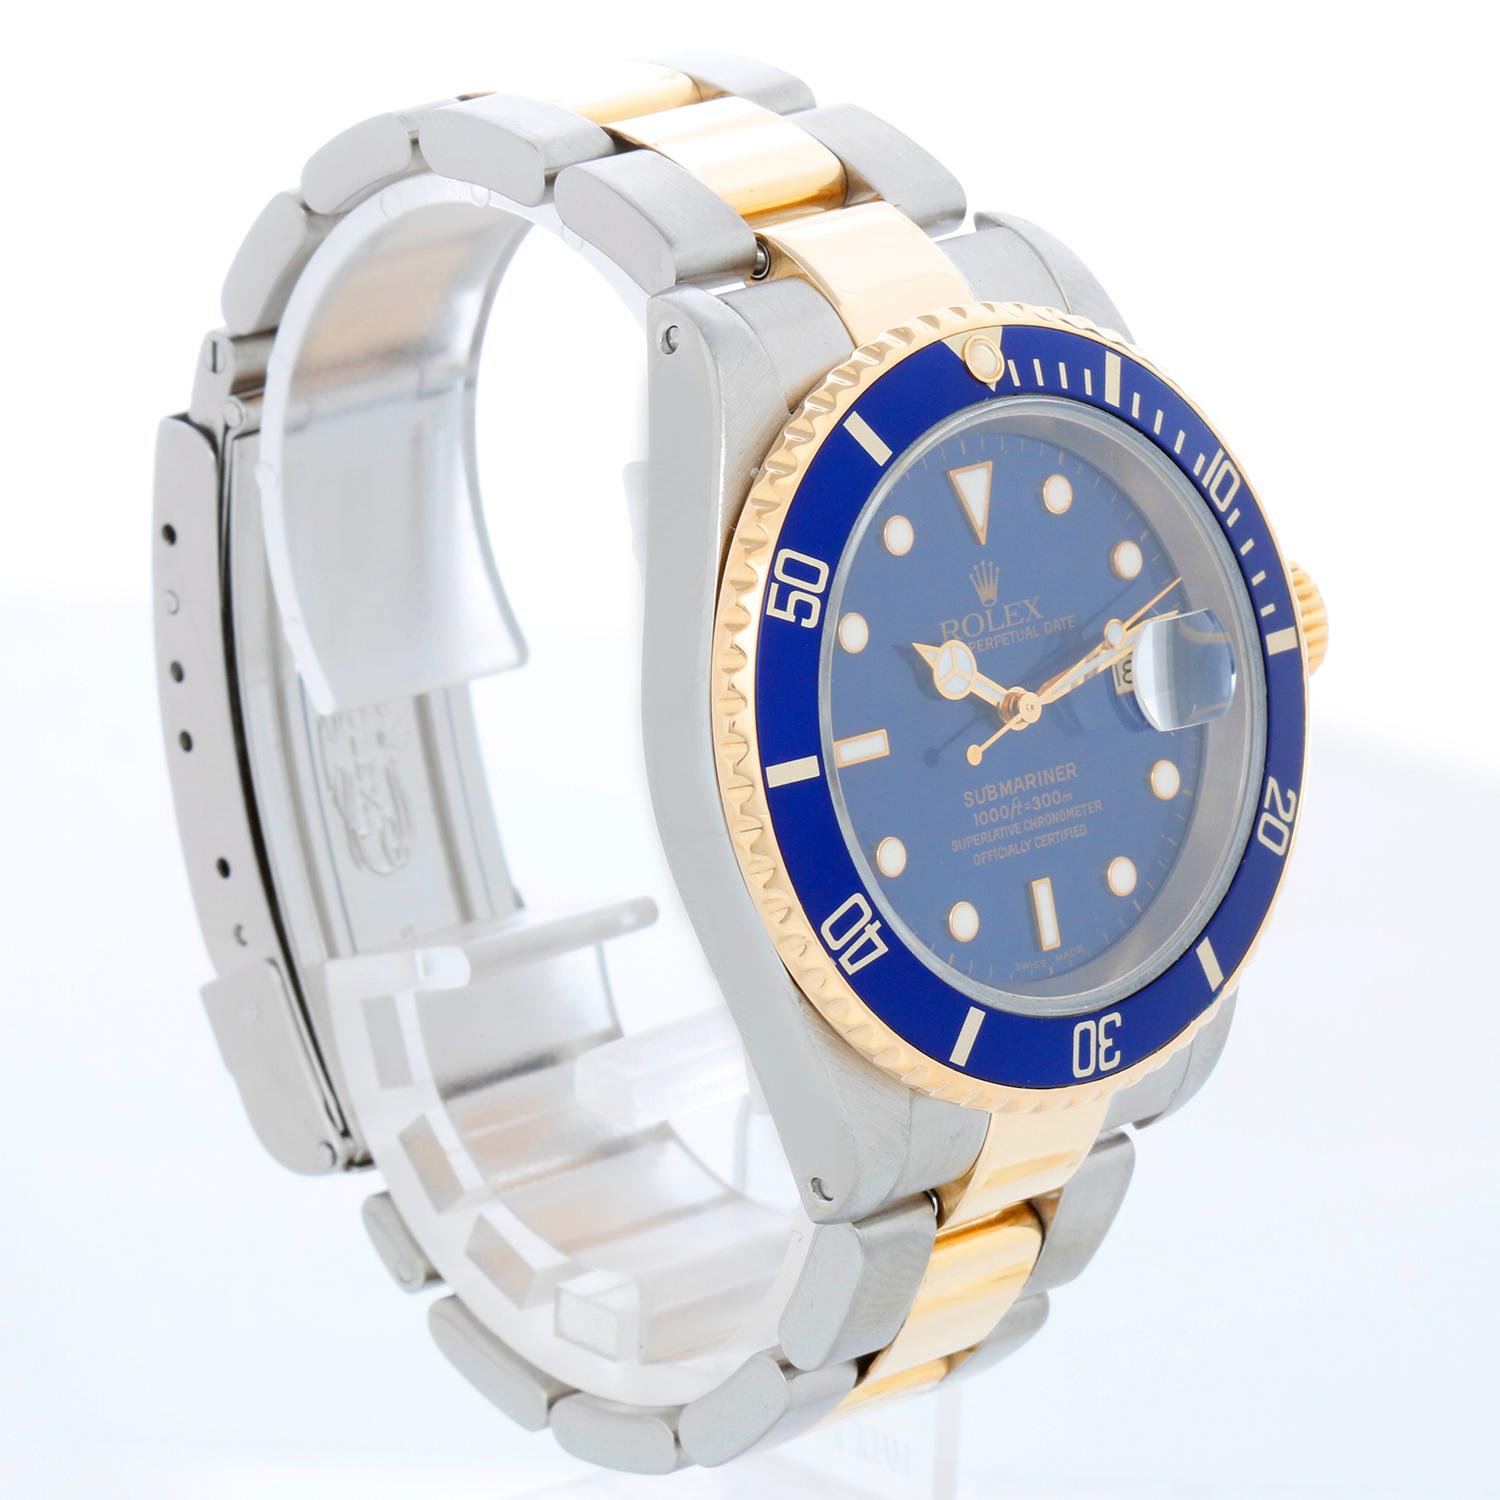 Rolex Submariner 2-Tone Steel & Gold Men's Watch 16613 - Automatic winding, 31 jewels, pressure proof to 1,000 feet. Stainless steel case with 18k yellow gold bezel  blue insert. Blue dial with luminous markers; date at 3 o'clock. Stainless steel